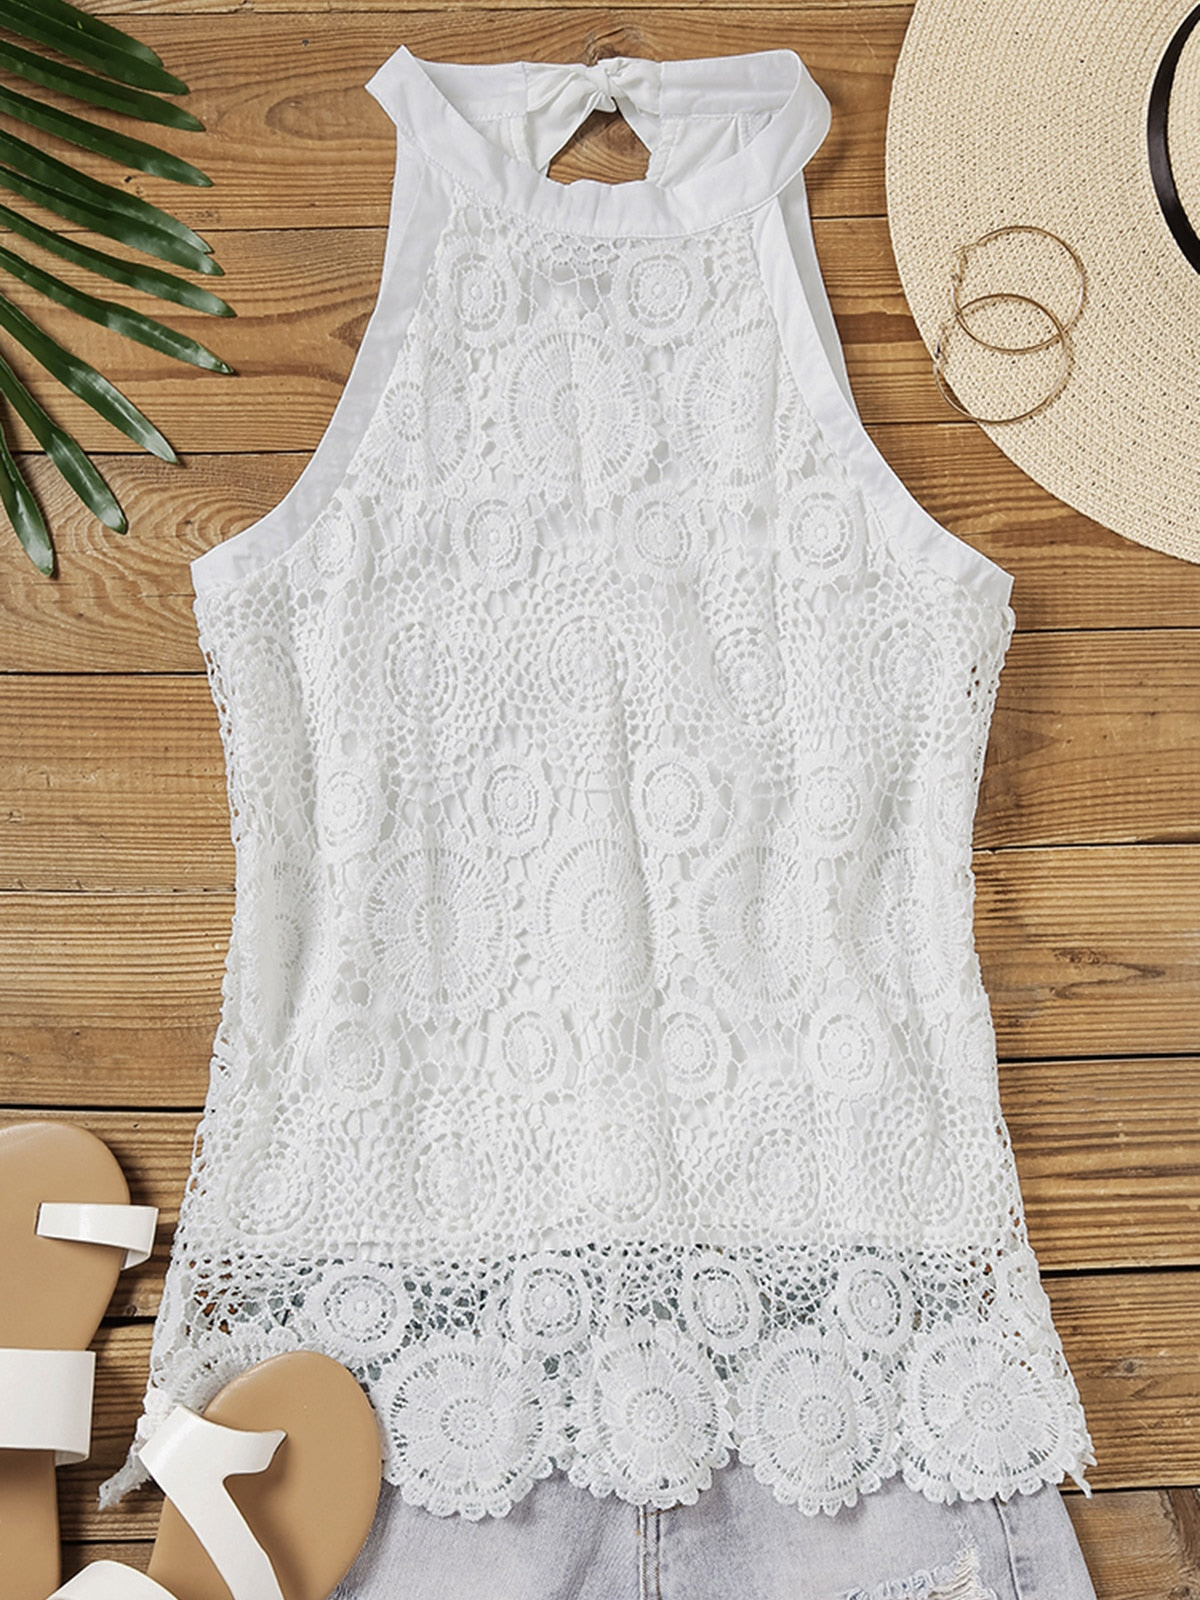 Lace Splicing Halter Tank White Crop Top Sexy Vest Women Solid Basic T-shirts Streetwear Sleeveless Tank Tops Female